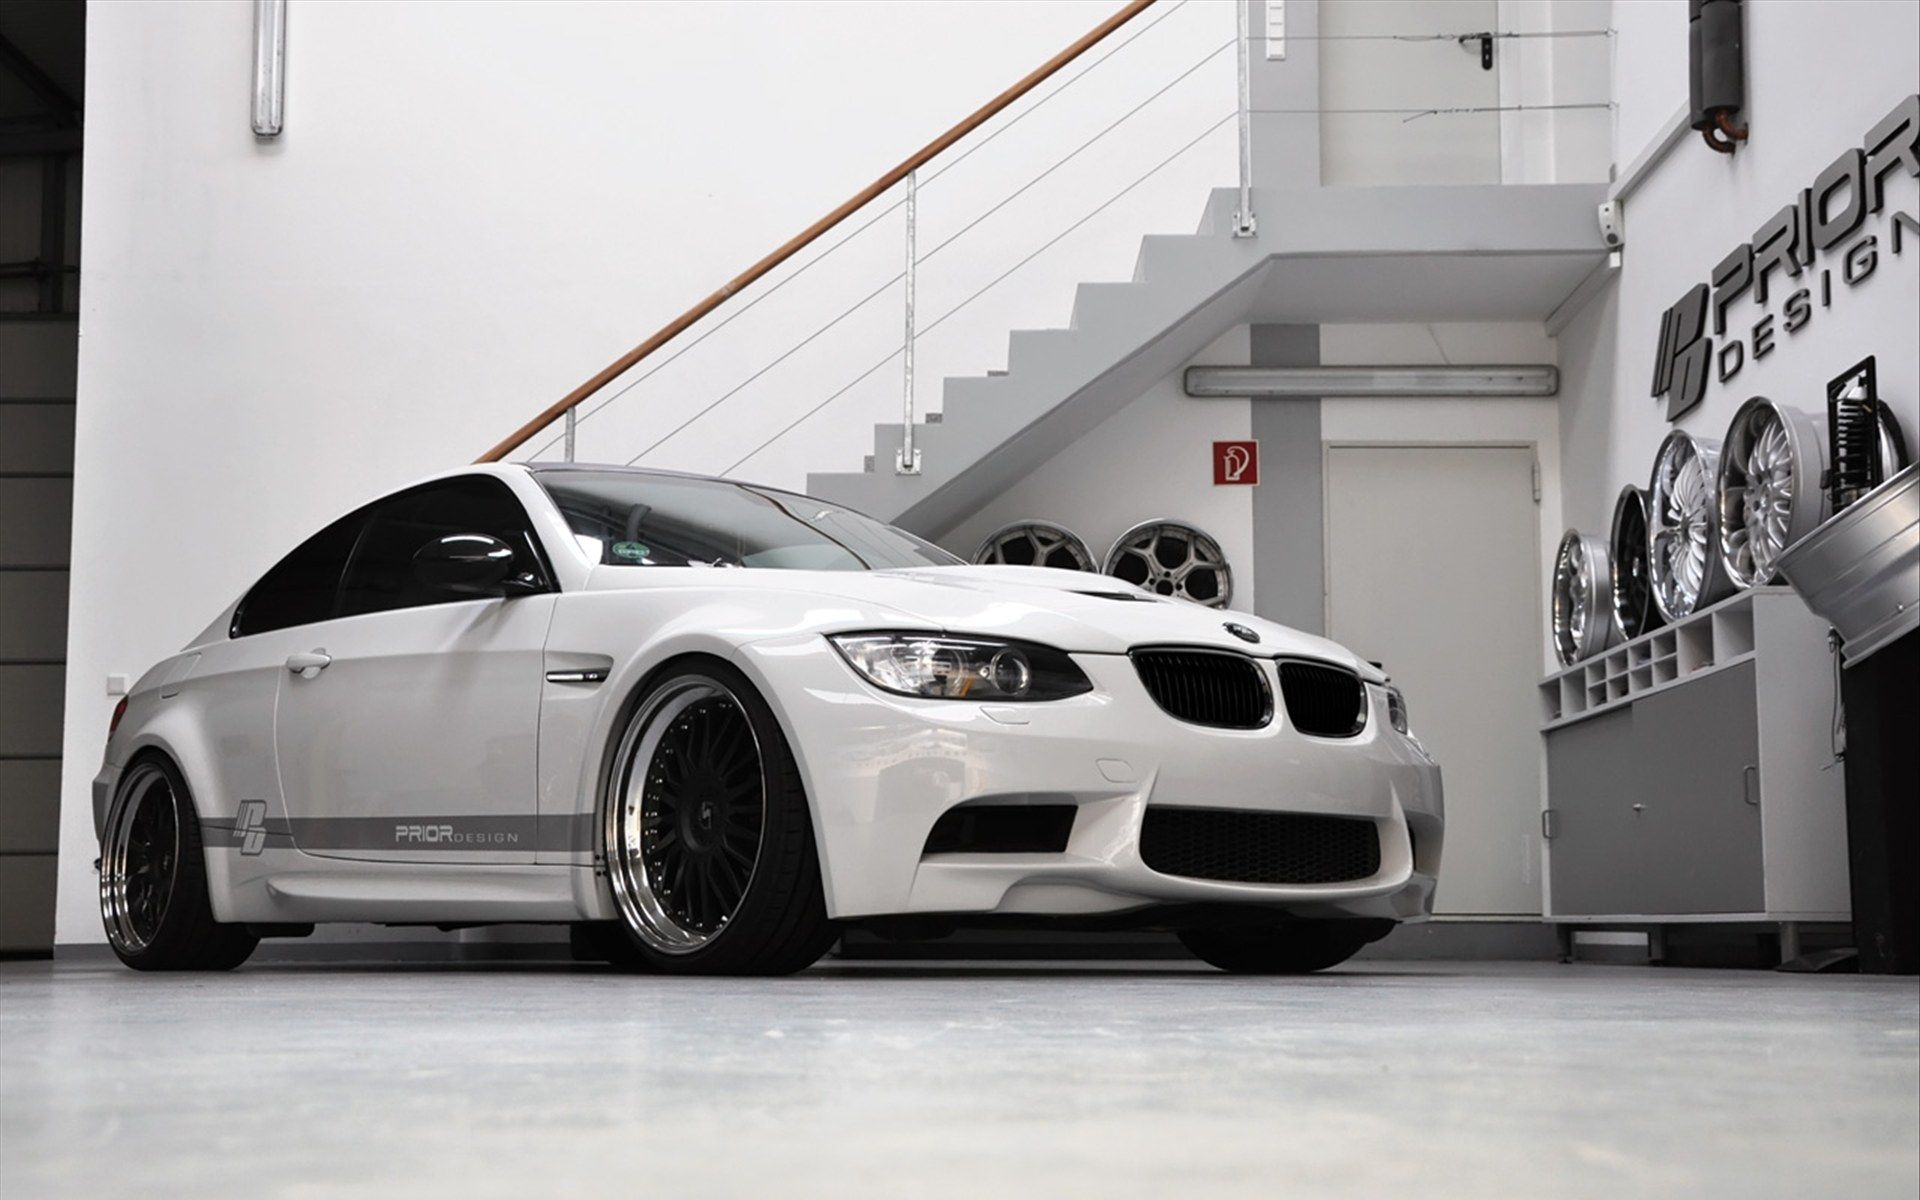 BMW M3 E92 | Free Desktop Wallpapers for HD, Widescreen and Mobile